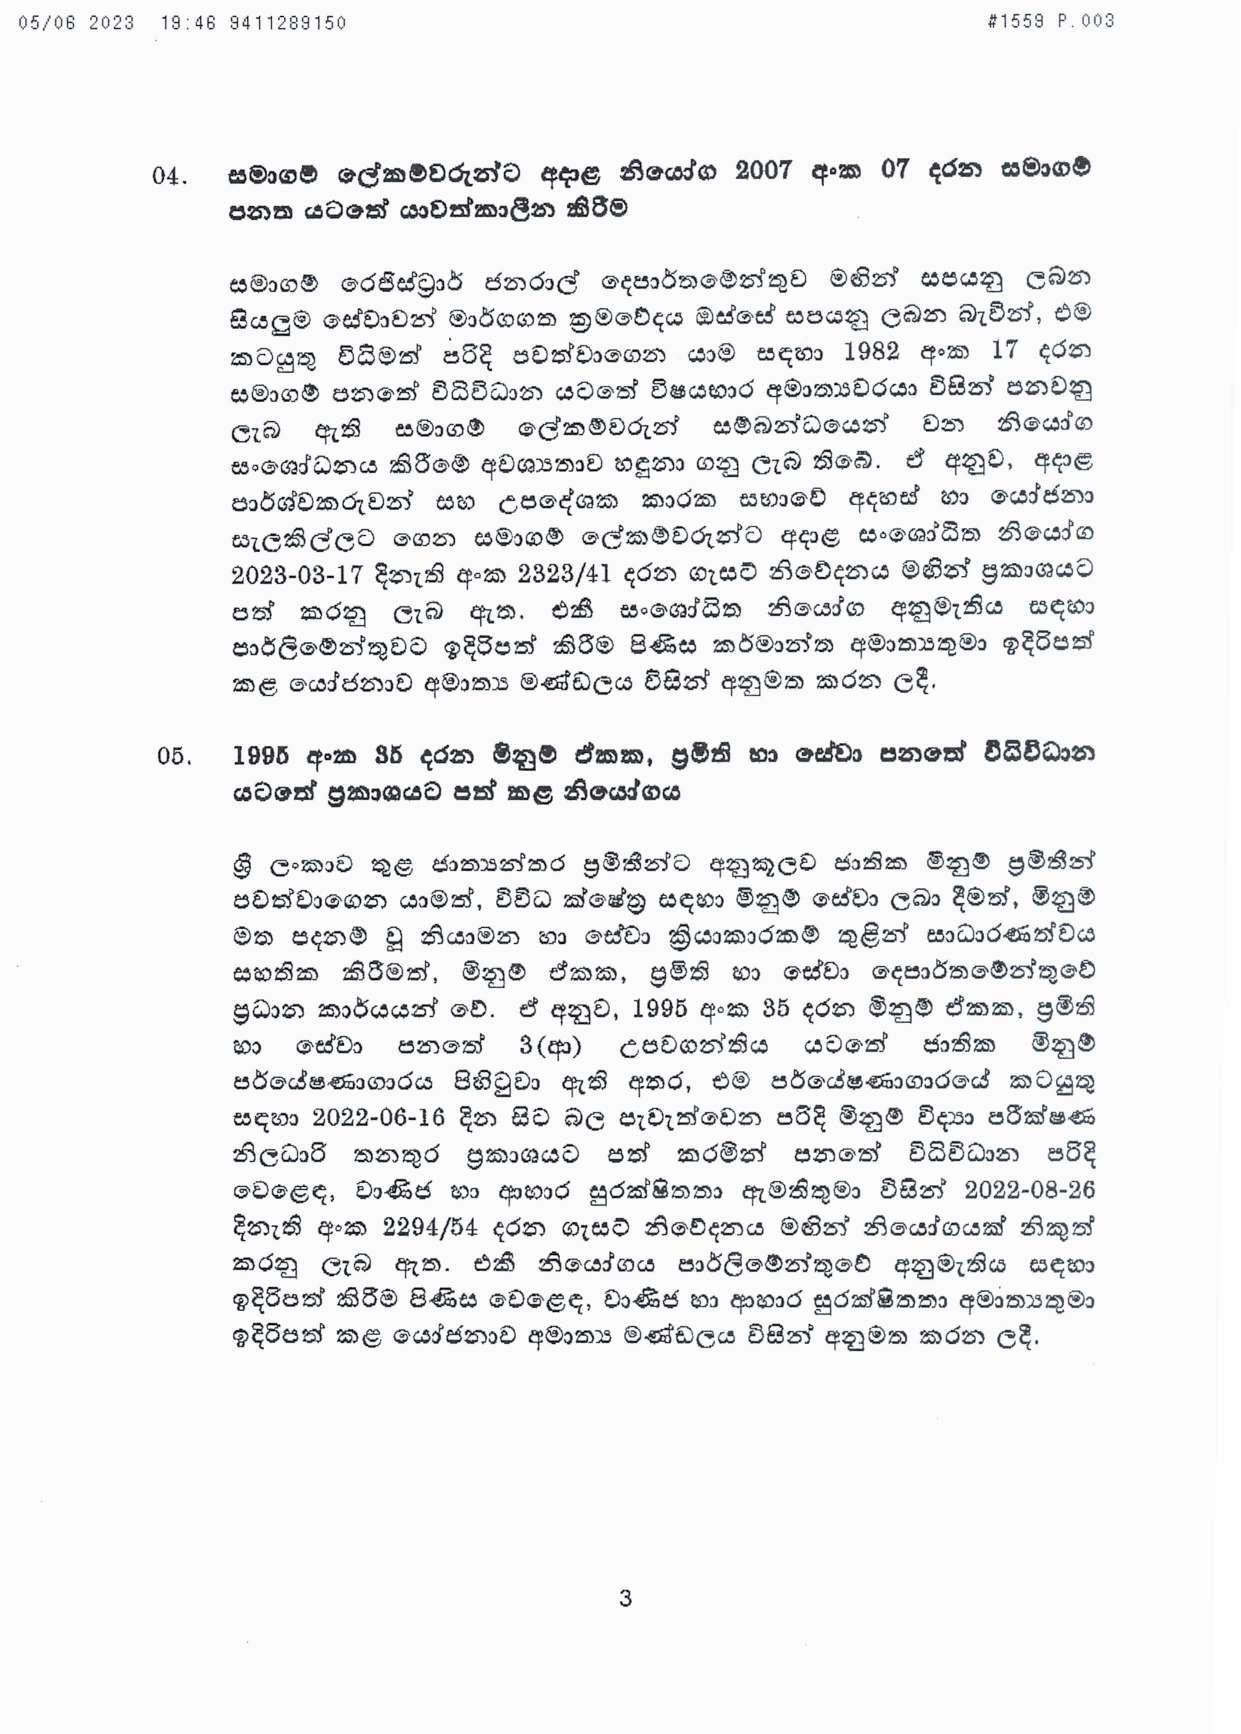 Cabinet Decisions on 05.06.2023 page 003